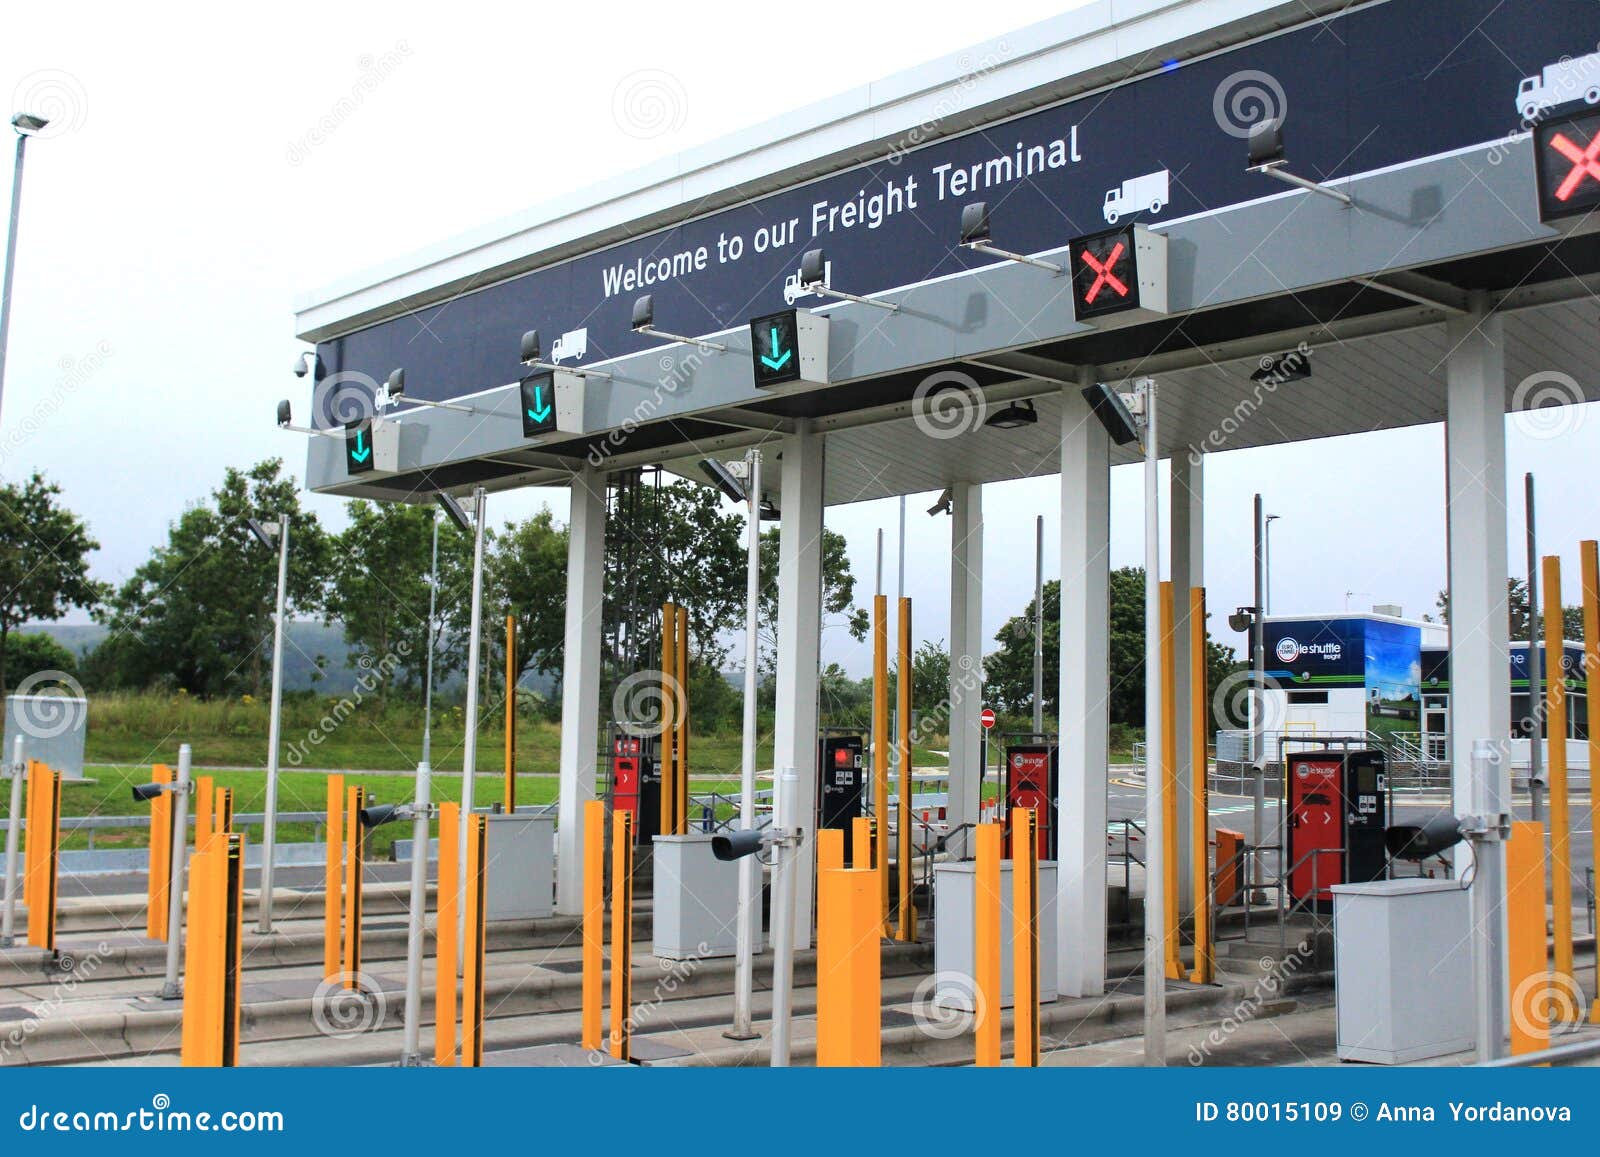 Eurotunnel Service in Booths Editorial Image - Image of barriers, 80015109